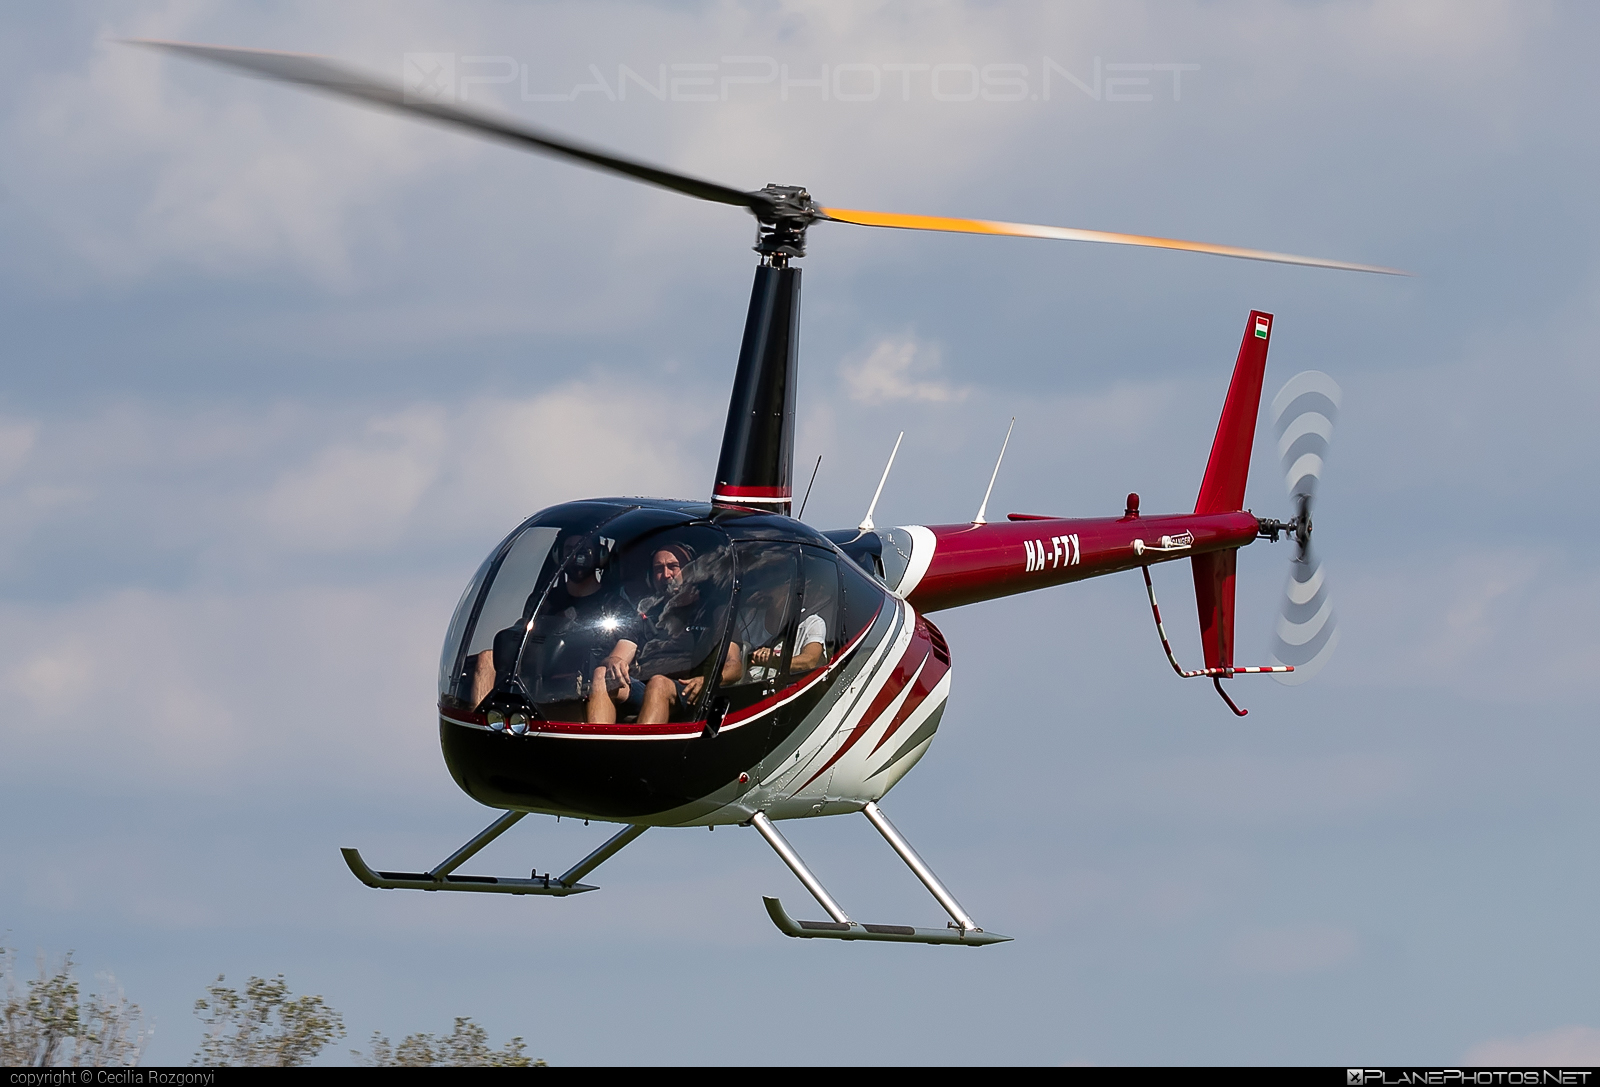 Robinson R44 Raven II - HA-FTX operated by BHS Hungary Kft. #bhshungary #r44 #r44raven #r44ravenii #robinson #robinson44 #robinson44ravenuii #robinsonr44 #robinsonr44ravenii